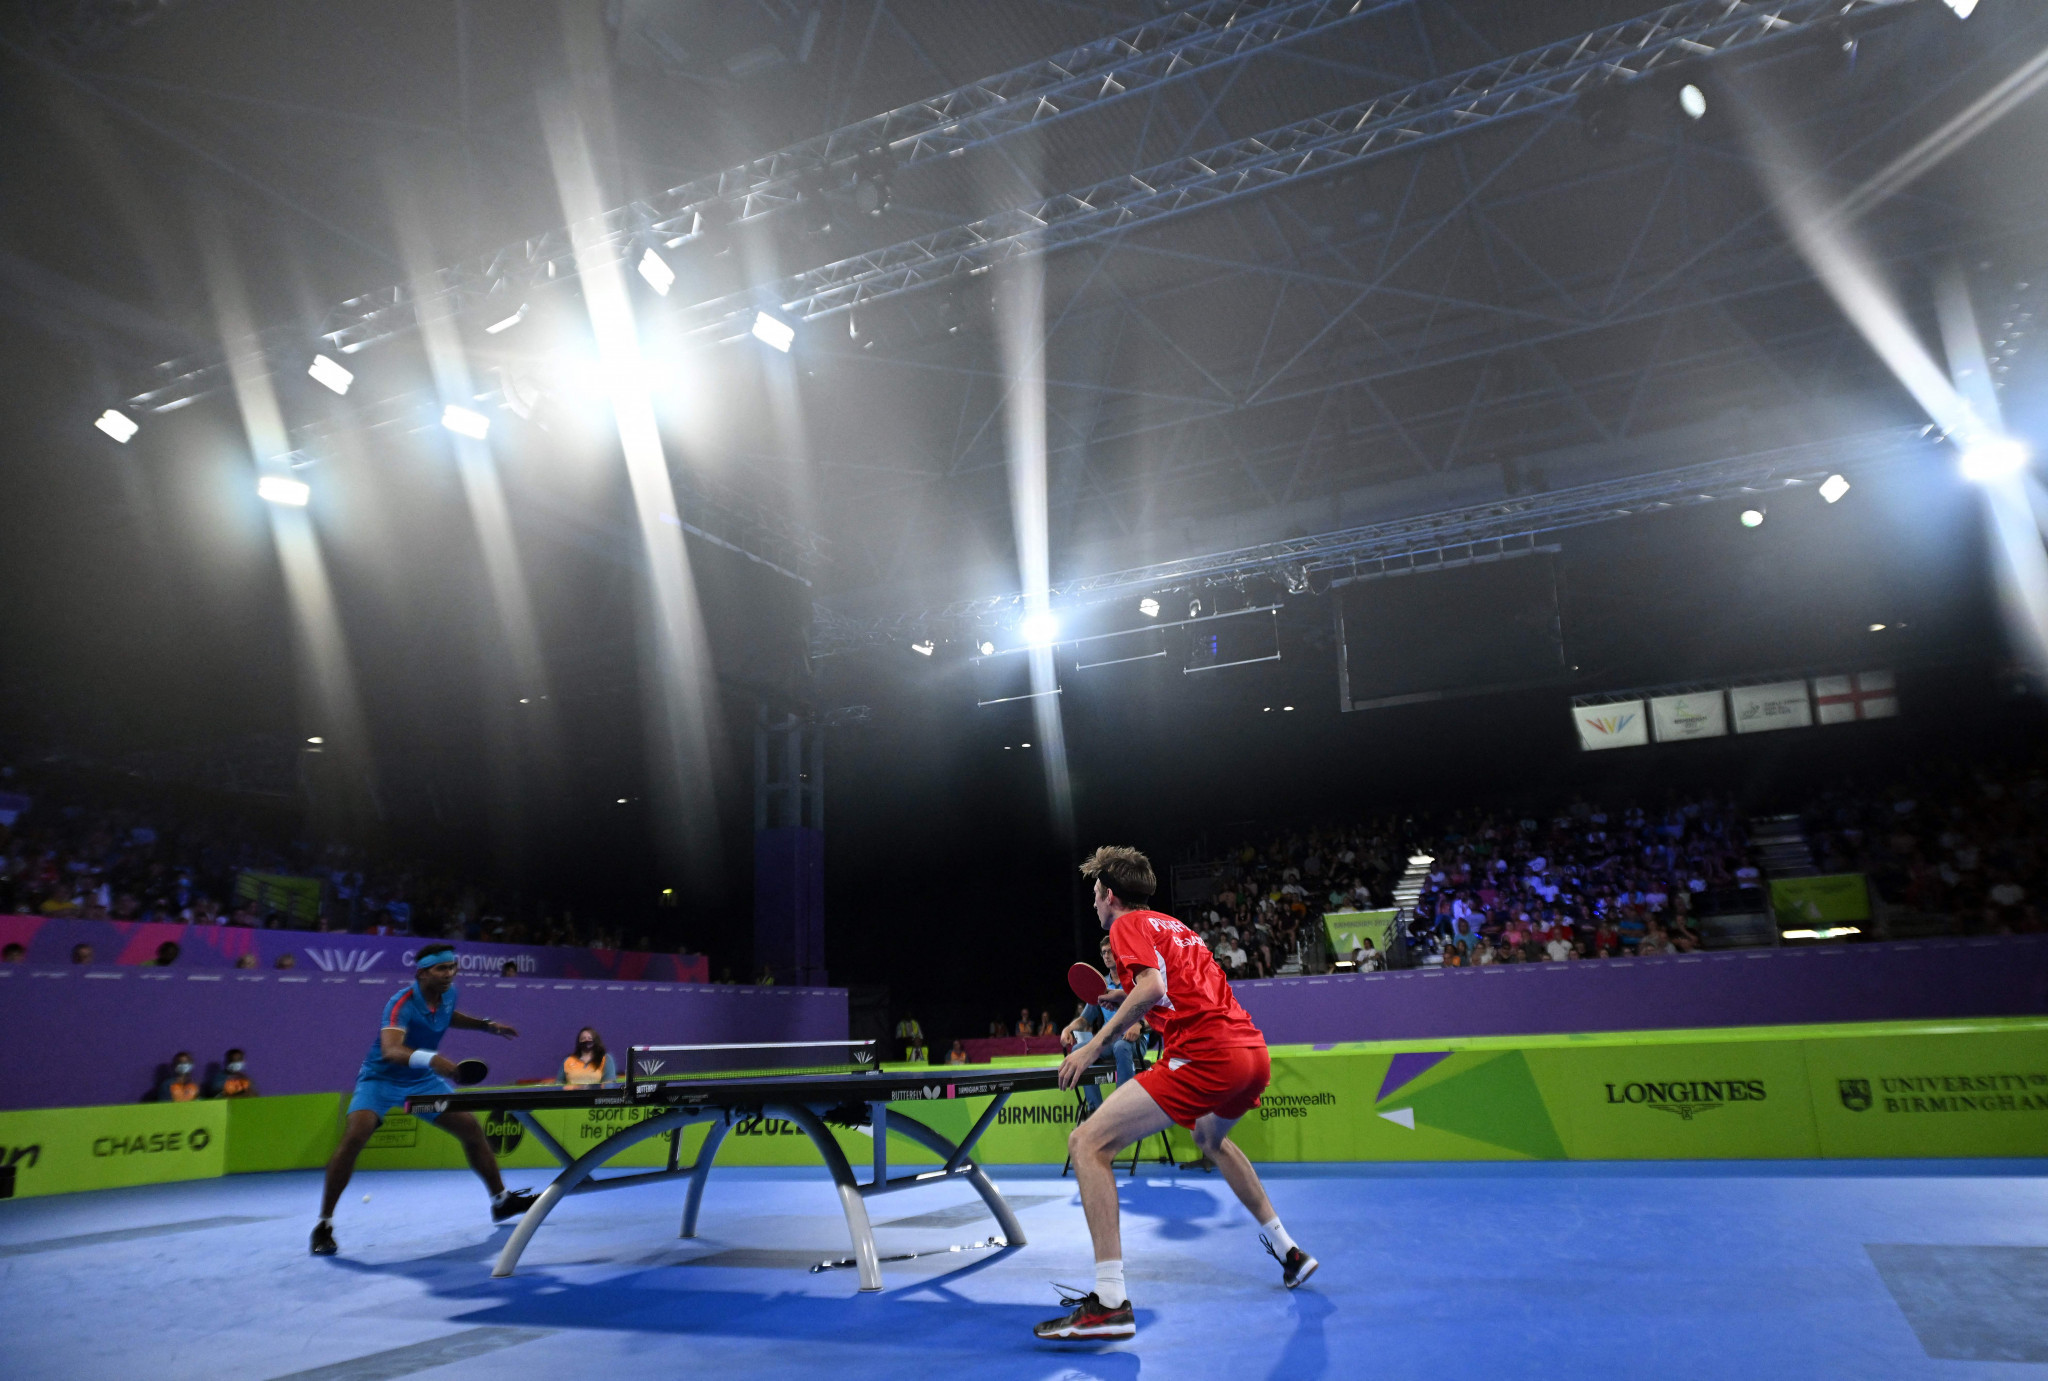 India and England have had interesting table tennis battles at the Commonwealth Games with Sharath Kamal and G Sathiyan taking on Paul Drinkhall and Liam Pitchford ©Getty Images